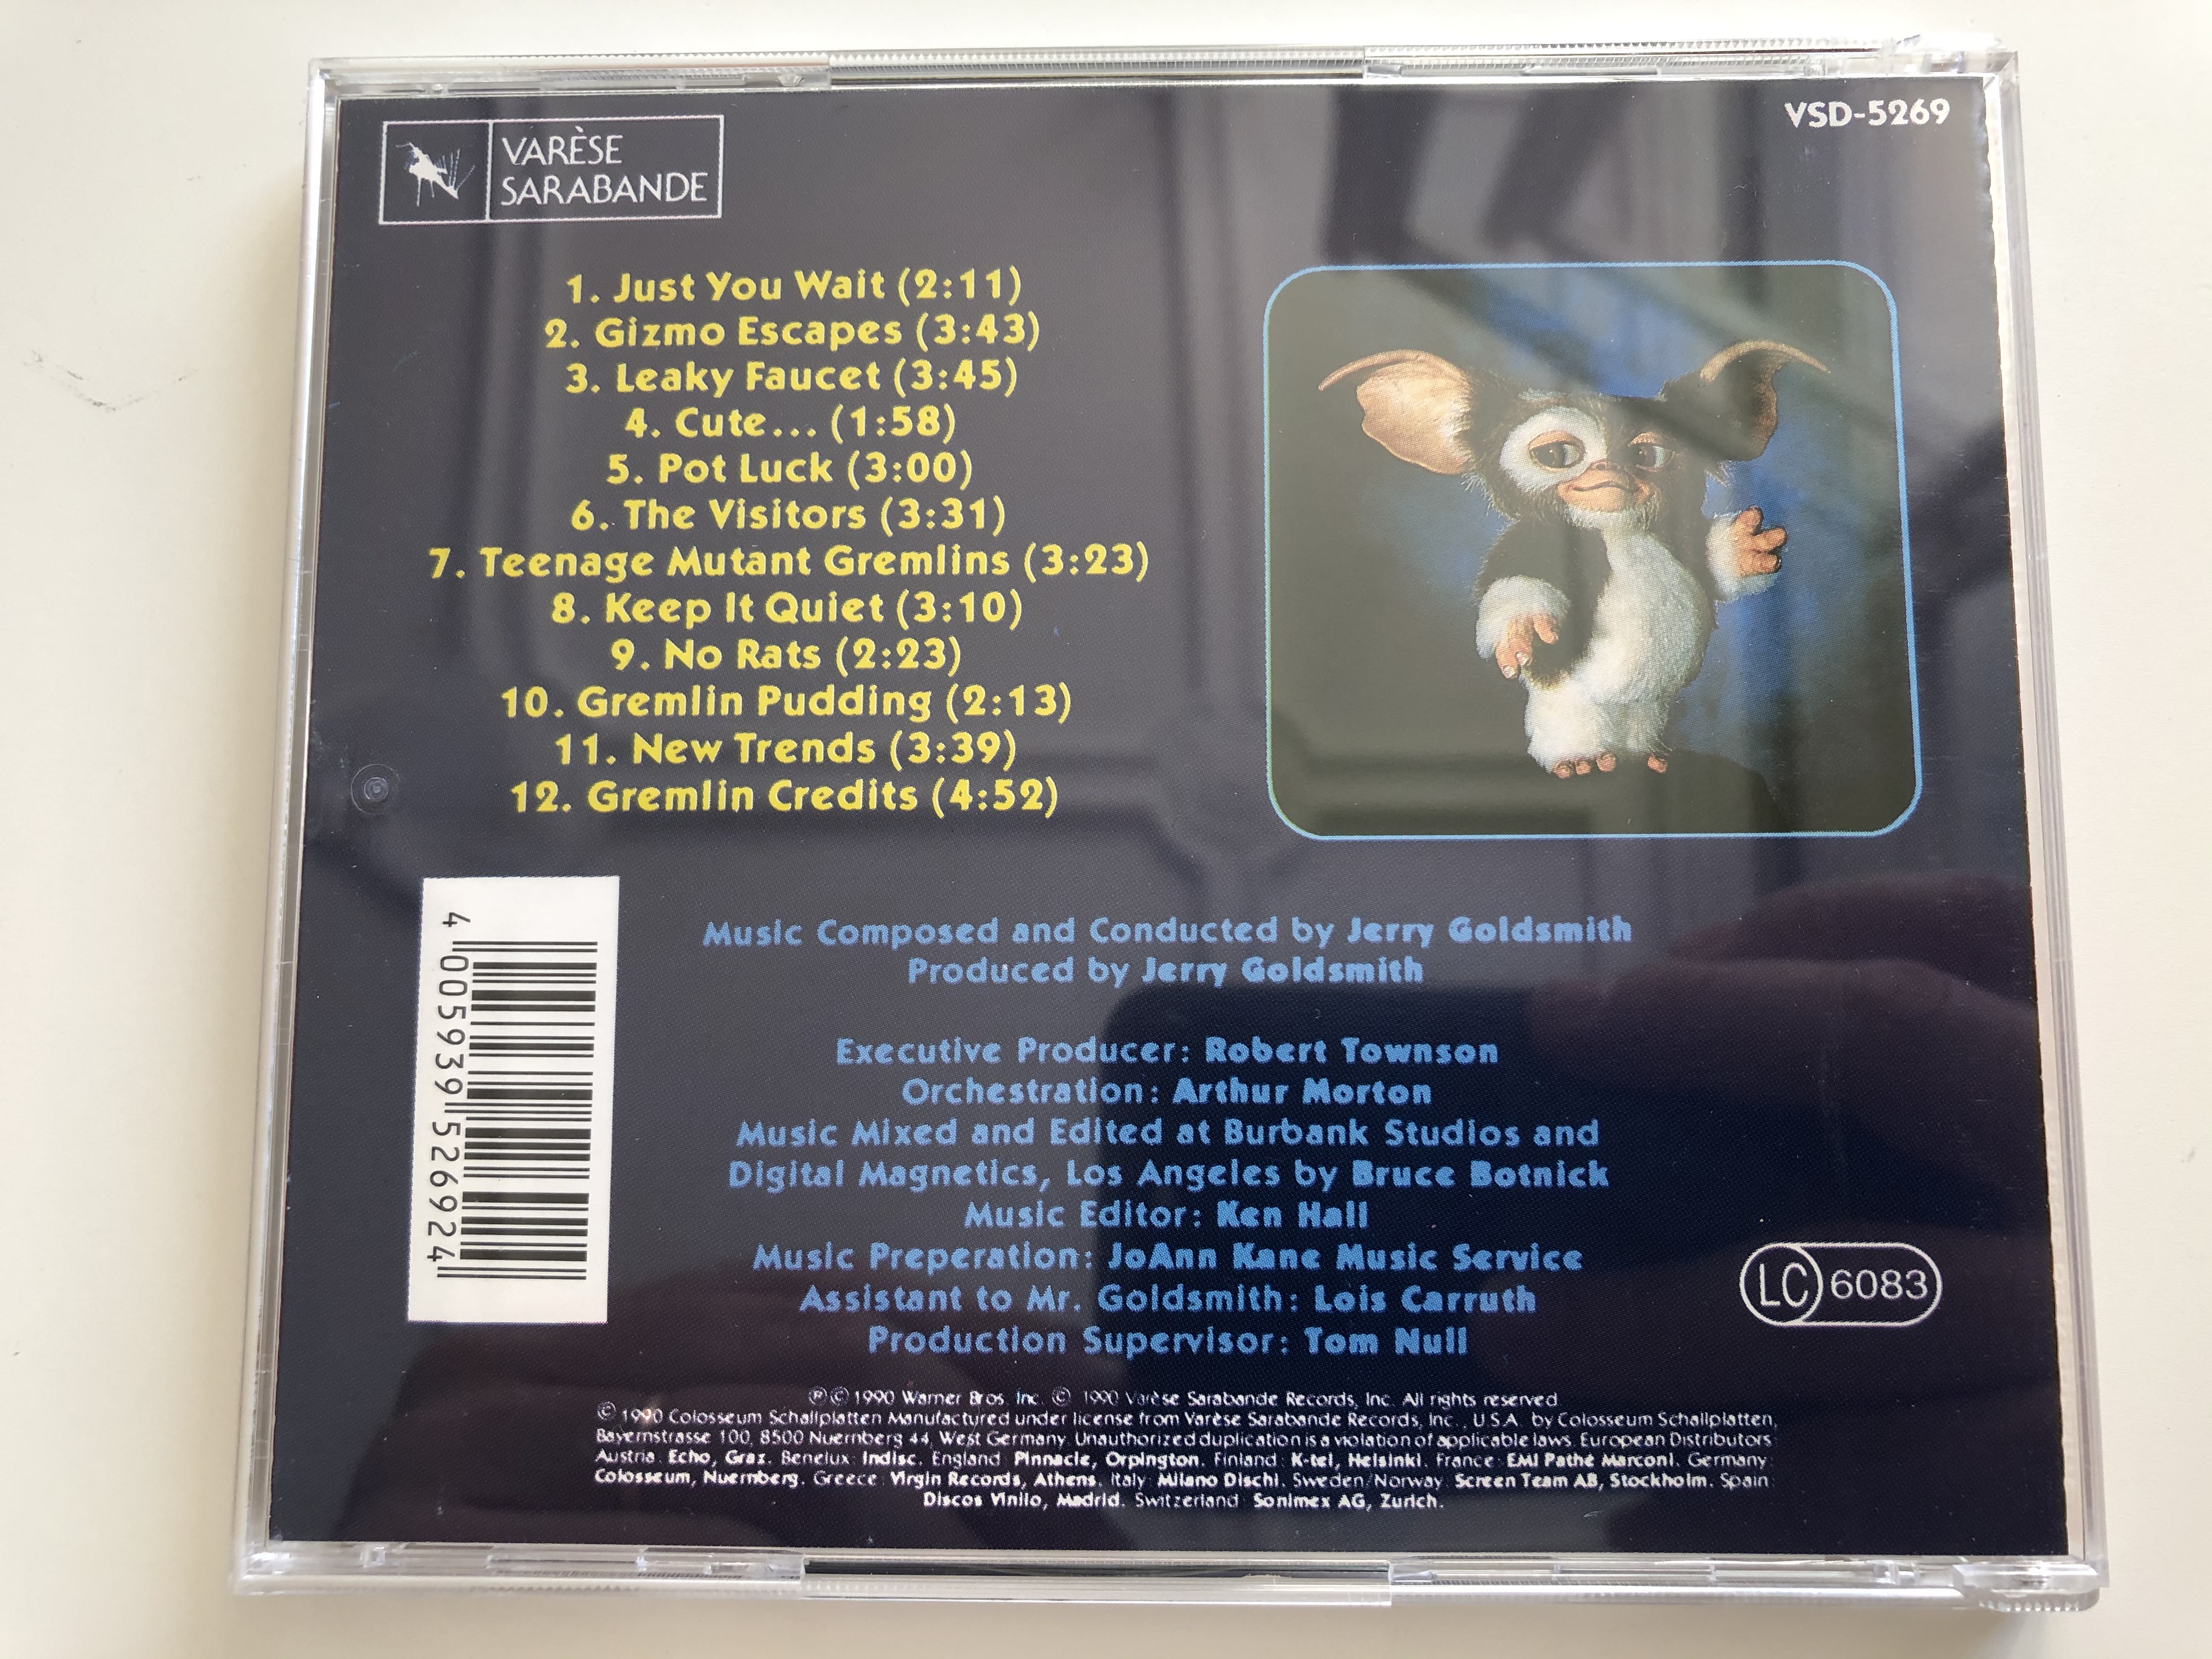 original-motion-picture-soundtrack-gremlins-2-the-new-batch-music-composed-and-conducted-by-jerry-goldsmith-var-se-sarabande-audio-cd-1990-vsd-5269-5-.jpg